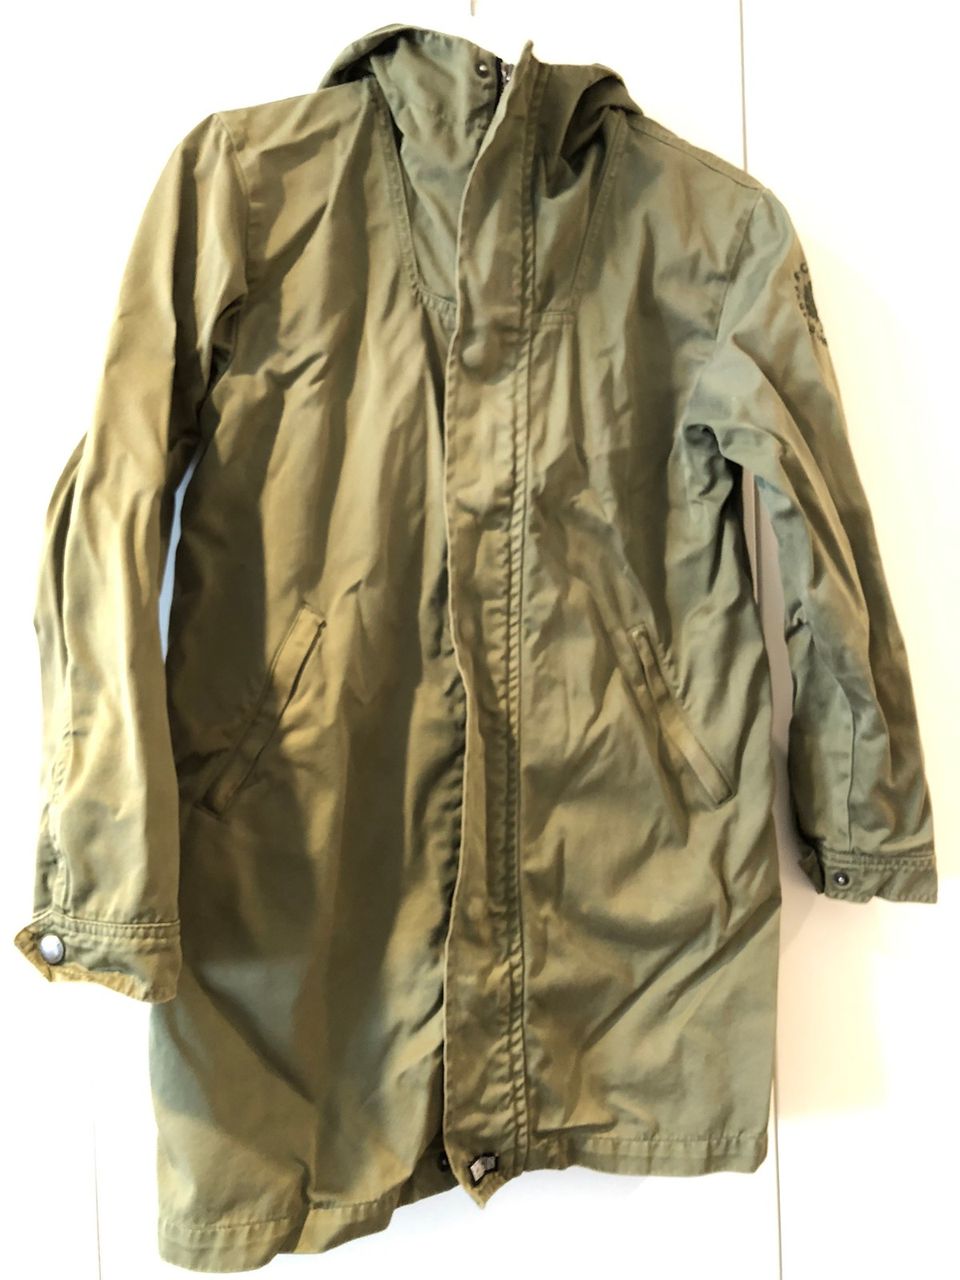 R-collection parka